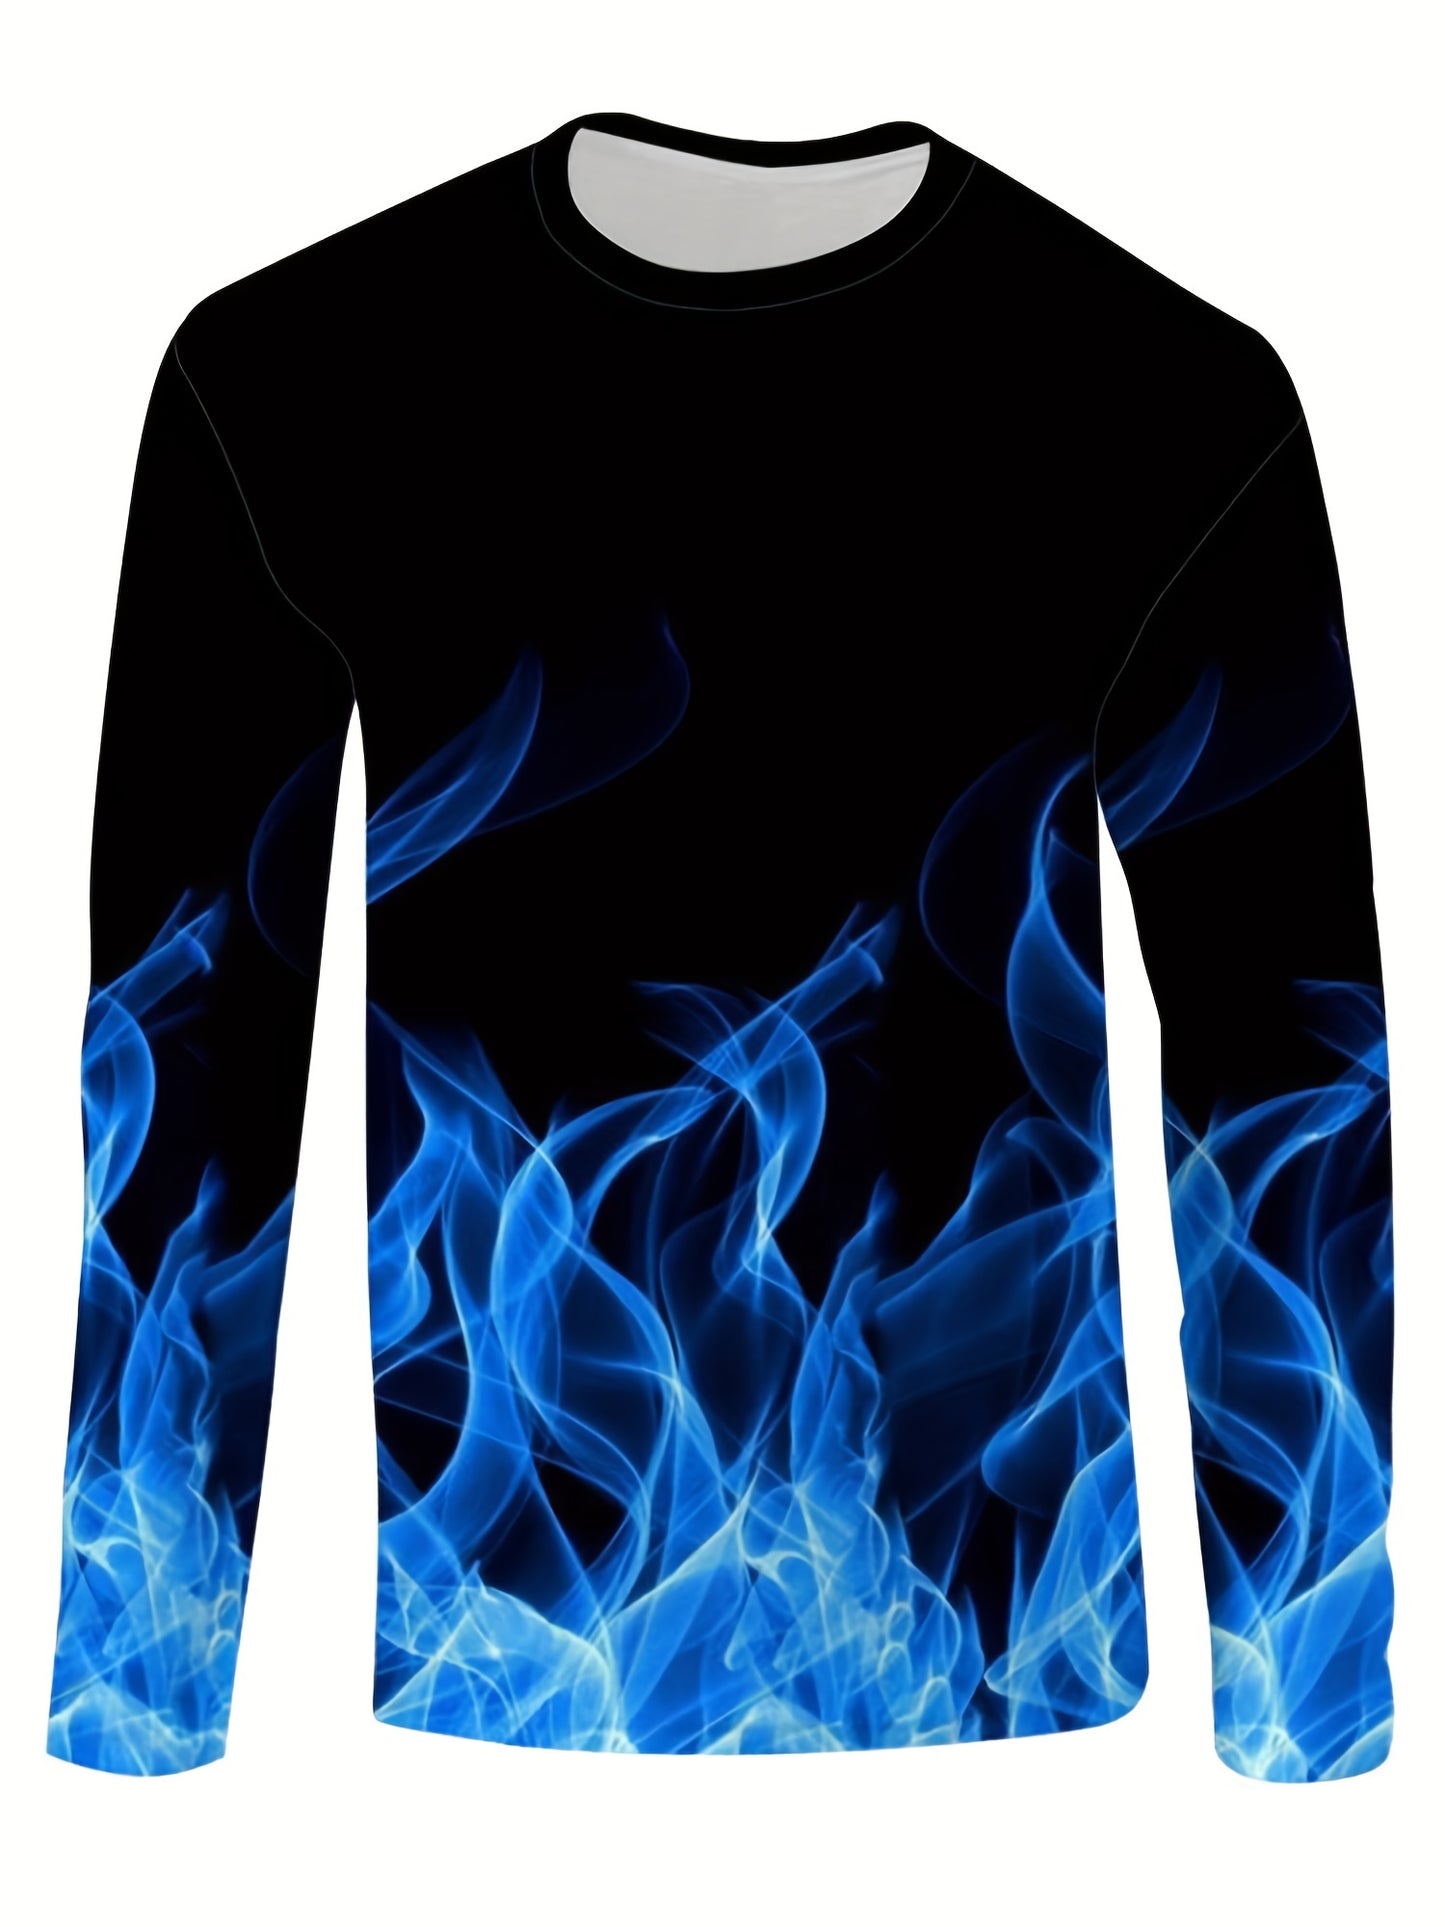 3D Digital Flame Print Men's Fashion Long Sleeve Crew Neck T-shirt, Men's Casual Tee For Spring Fall